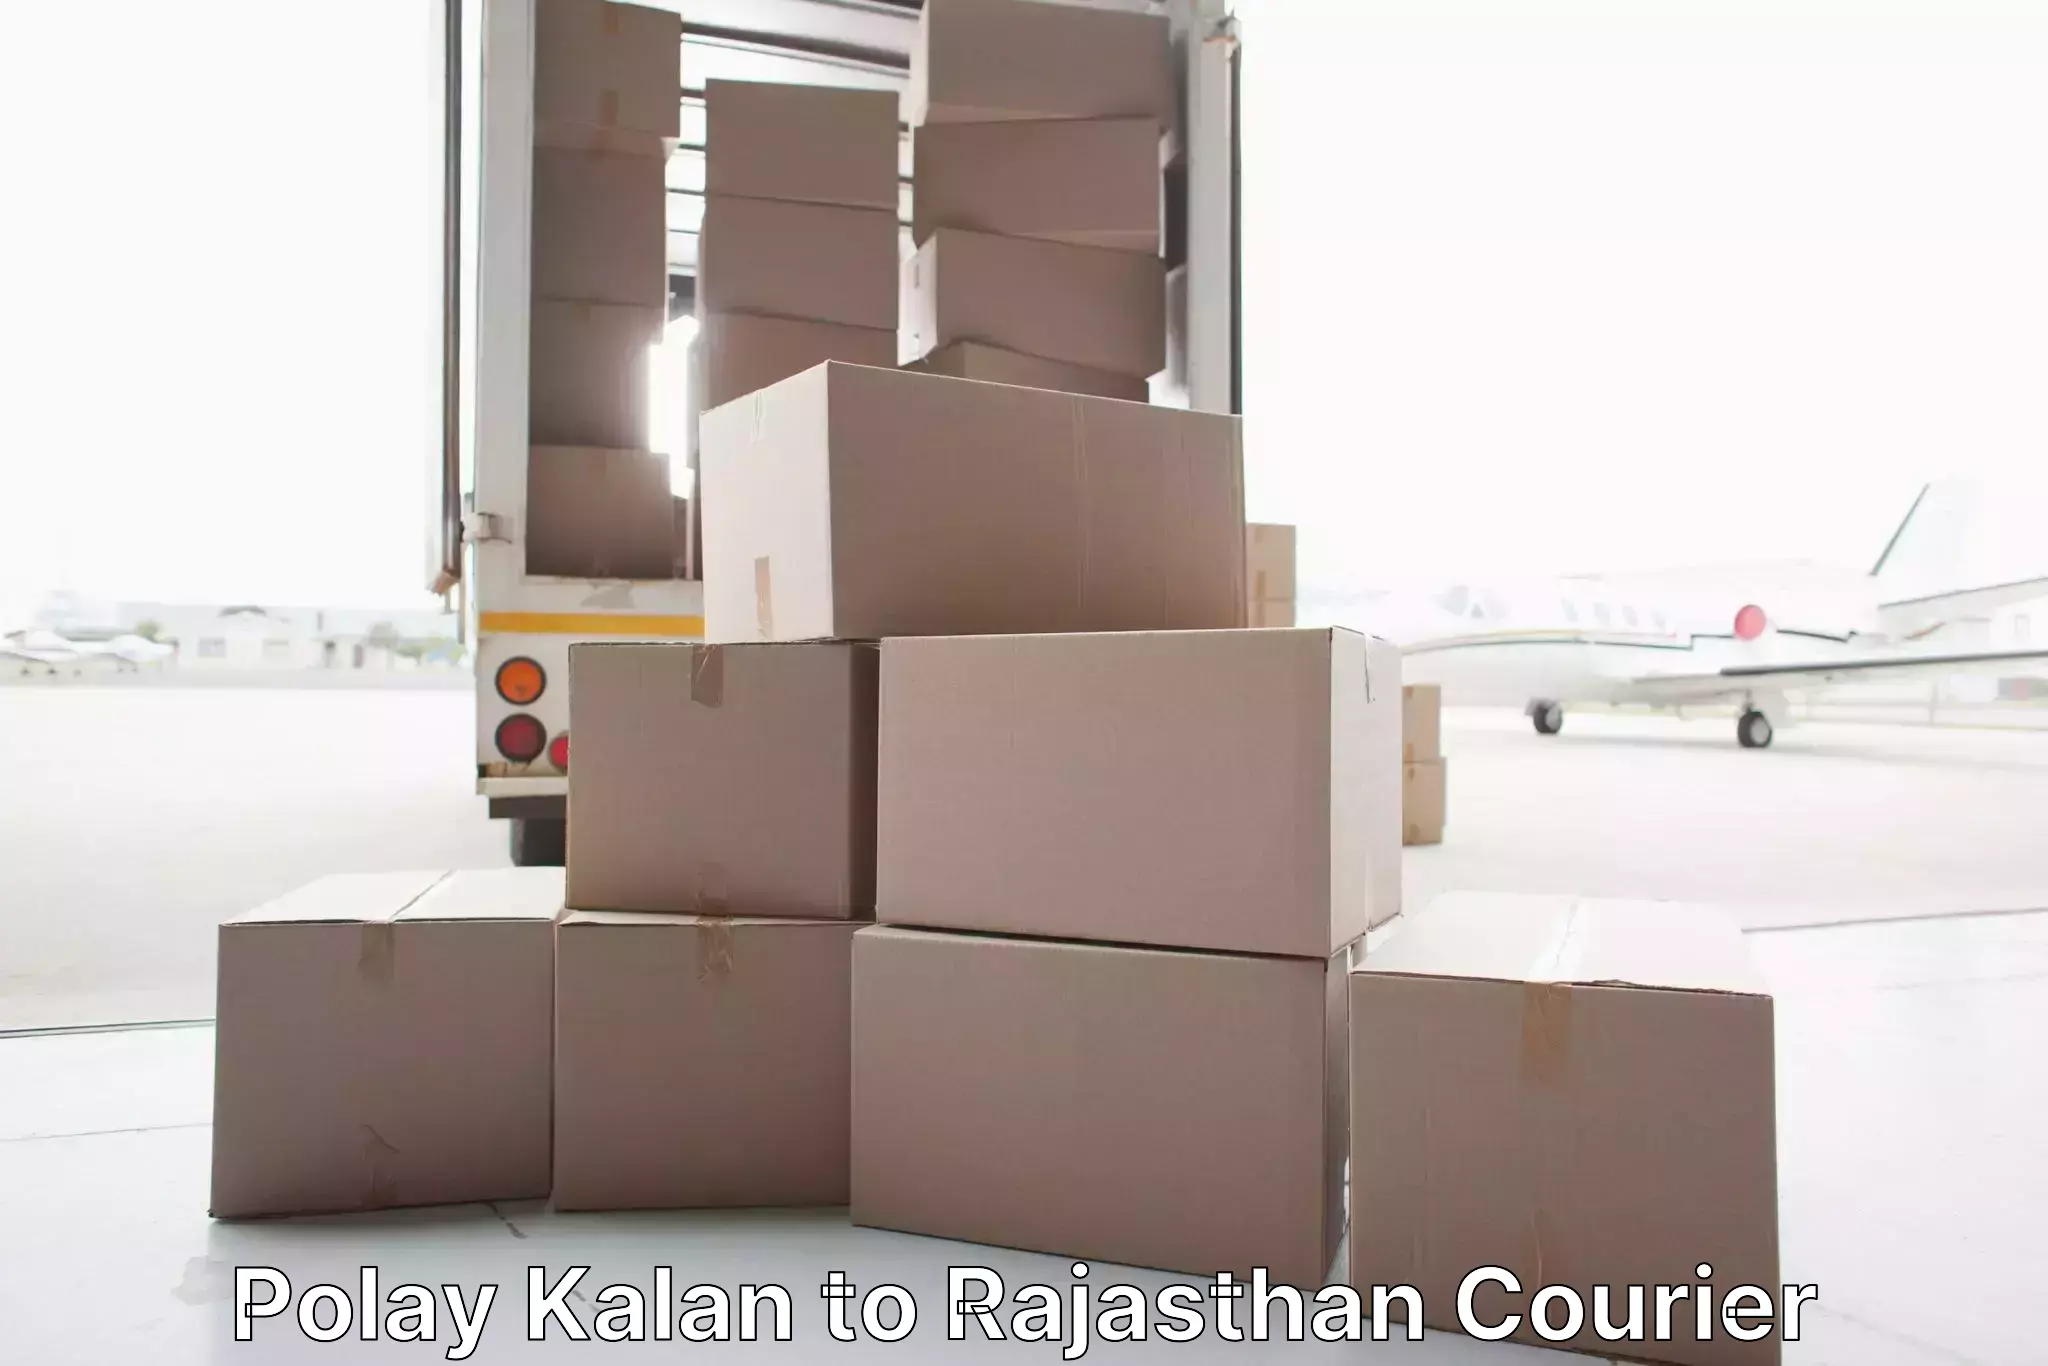 Trusted household movers Polay Kalan to Bari Dholpur